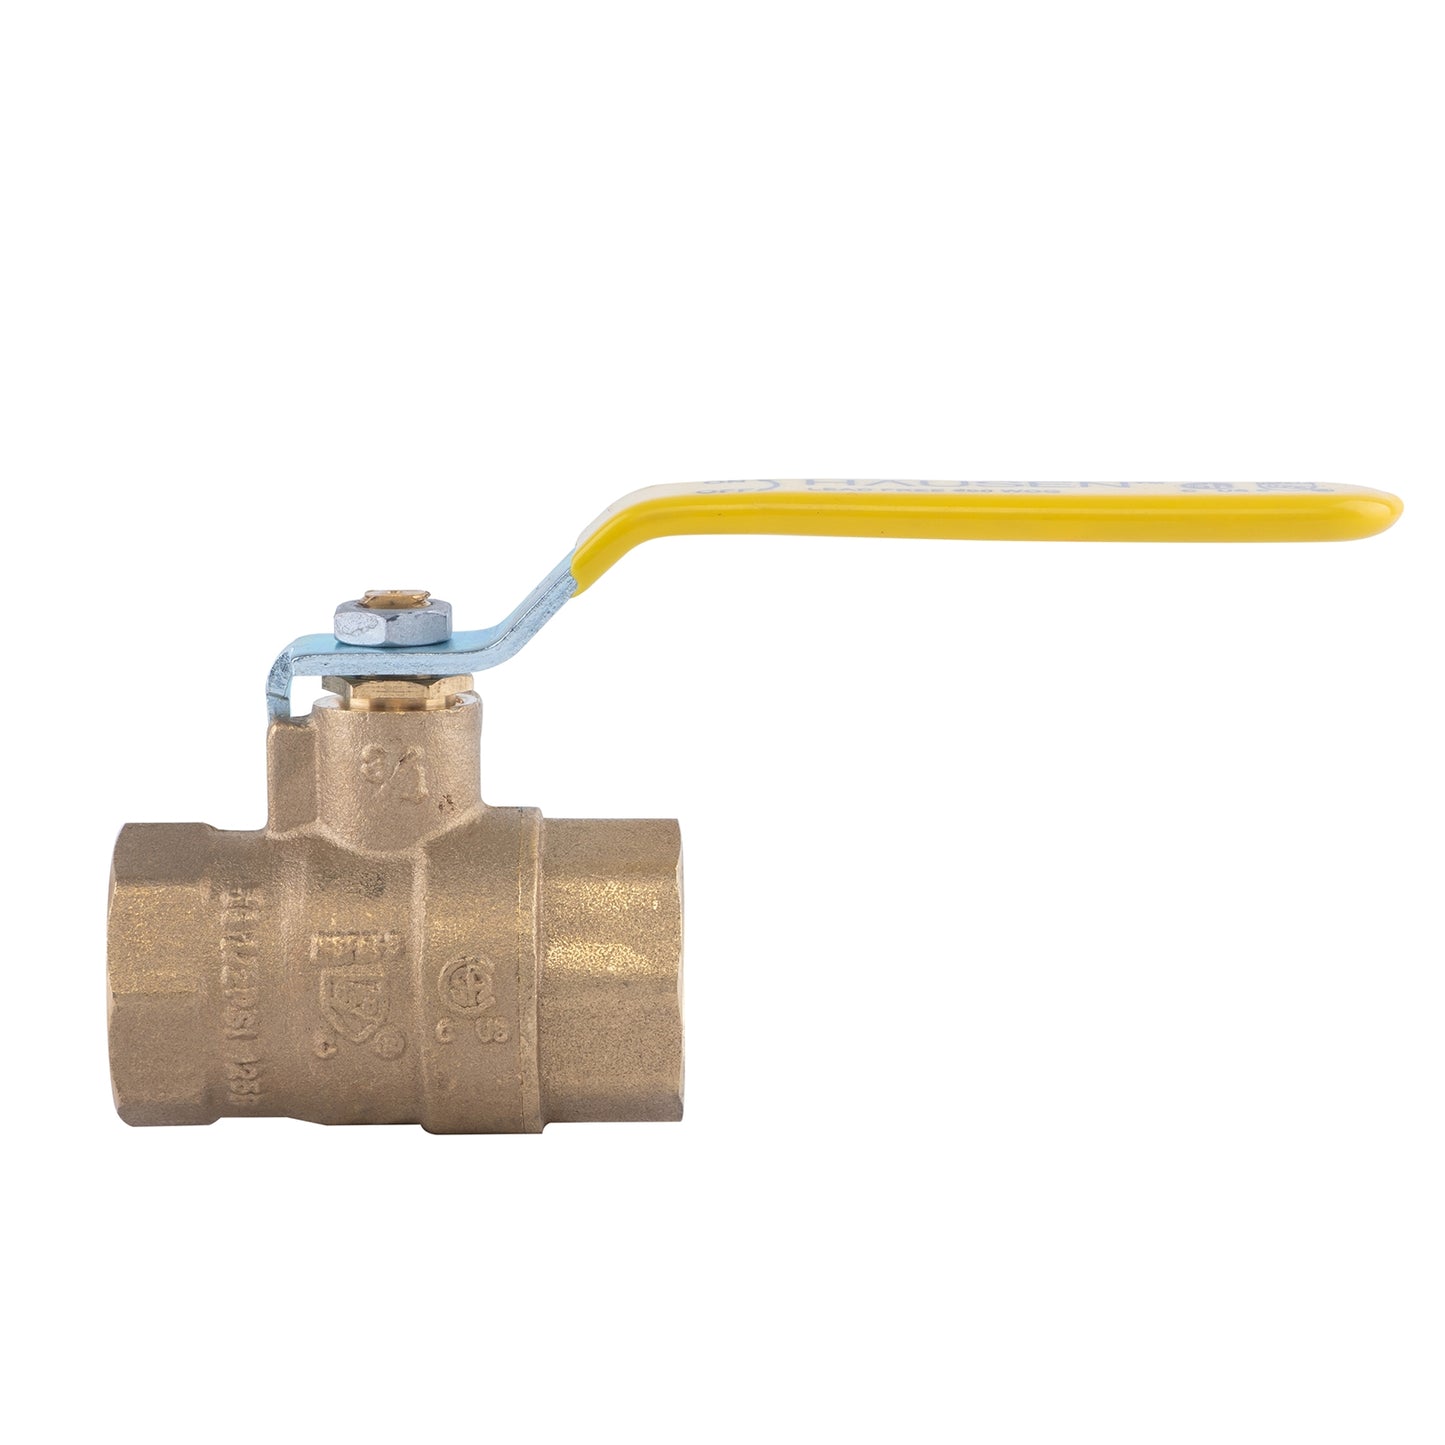 Hausen 3/4-inch FIP (Female Iron Pipe) x 3/4-inch FIP (Female Iron Pipe) Full Port Threaded Brass Ball Valve; Blowout Resistant Stem; For Use in Potable Water Distribution Systems, 5-Pack